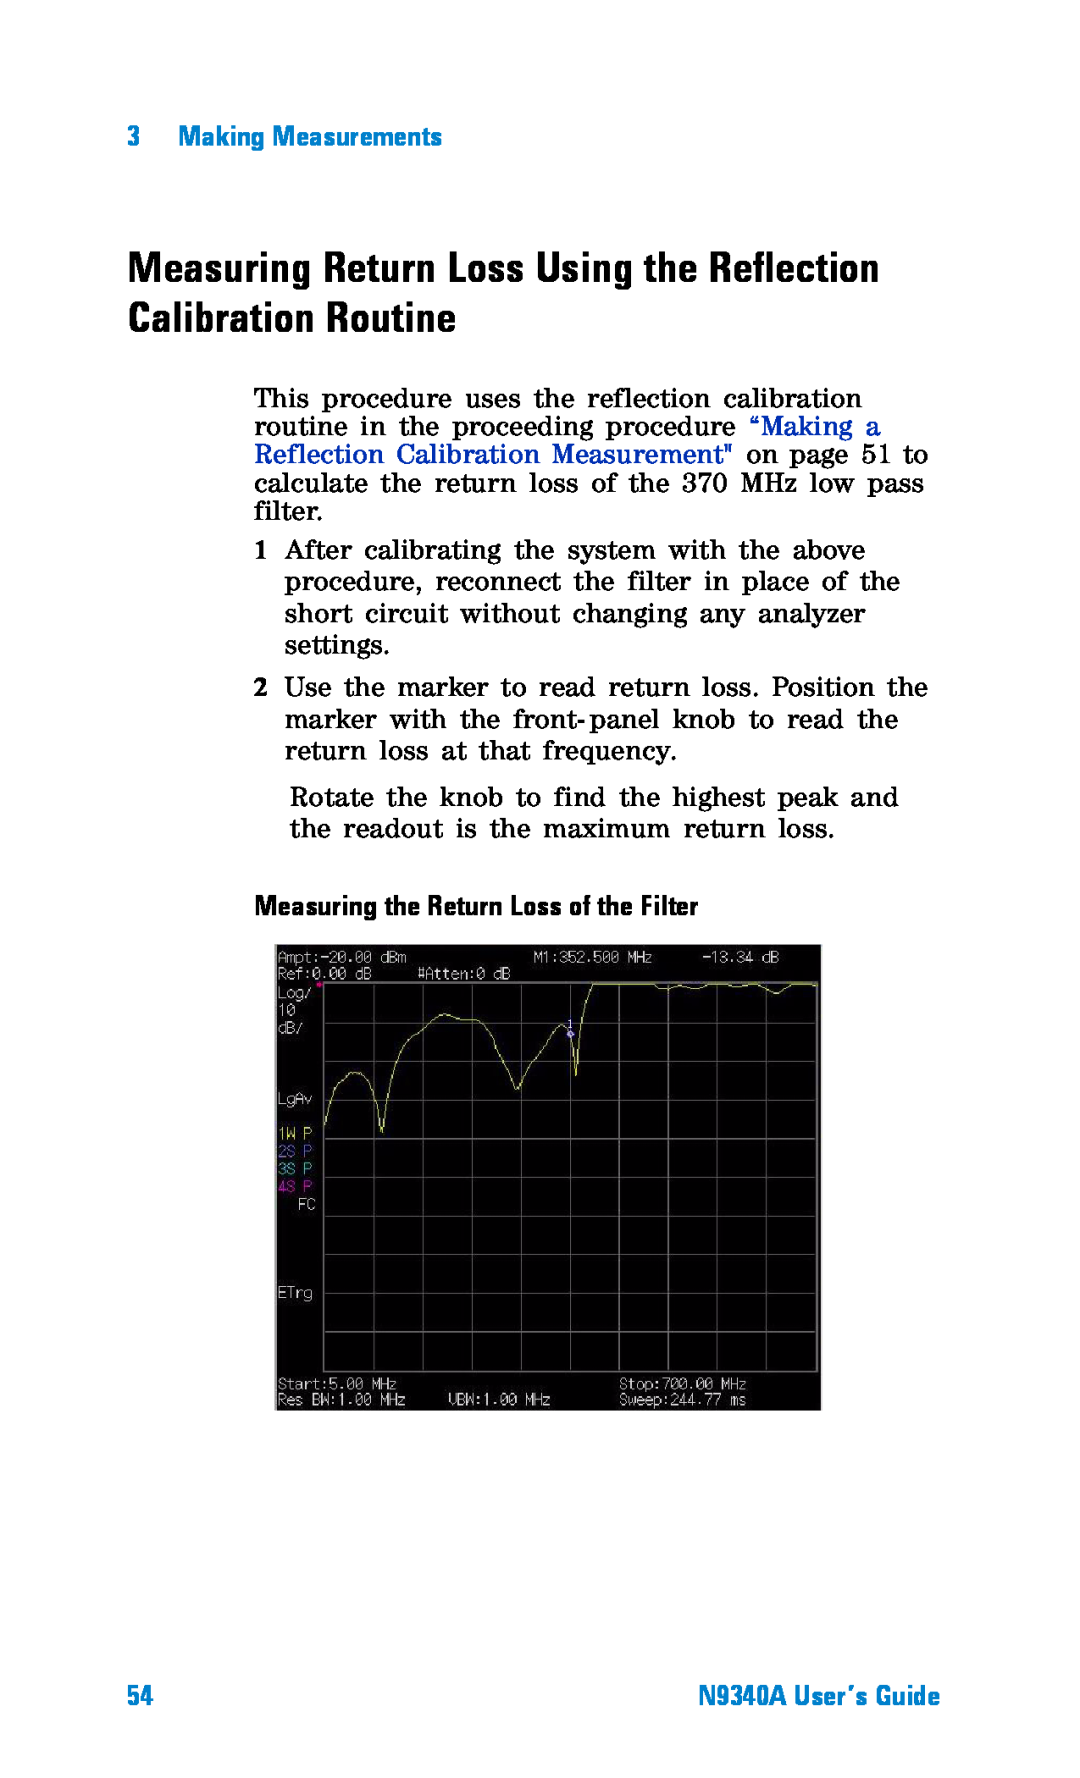 Agilent Technologies N9340A manual Measuring Return Loss Using the Reflection Calibration Routine, Making Measurements 